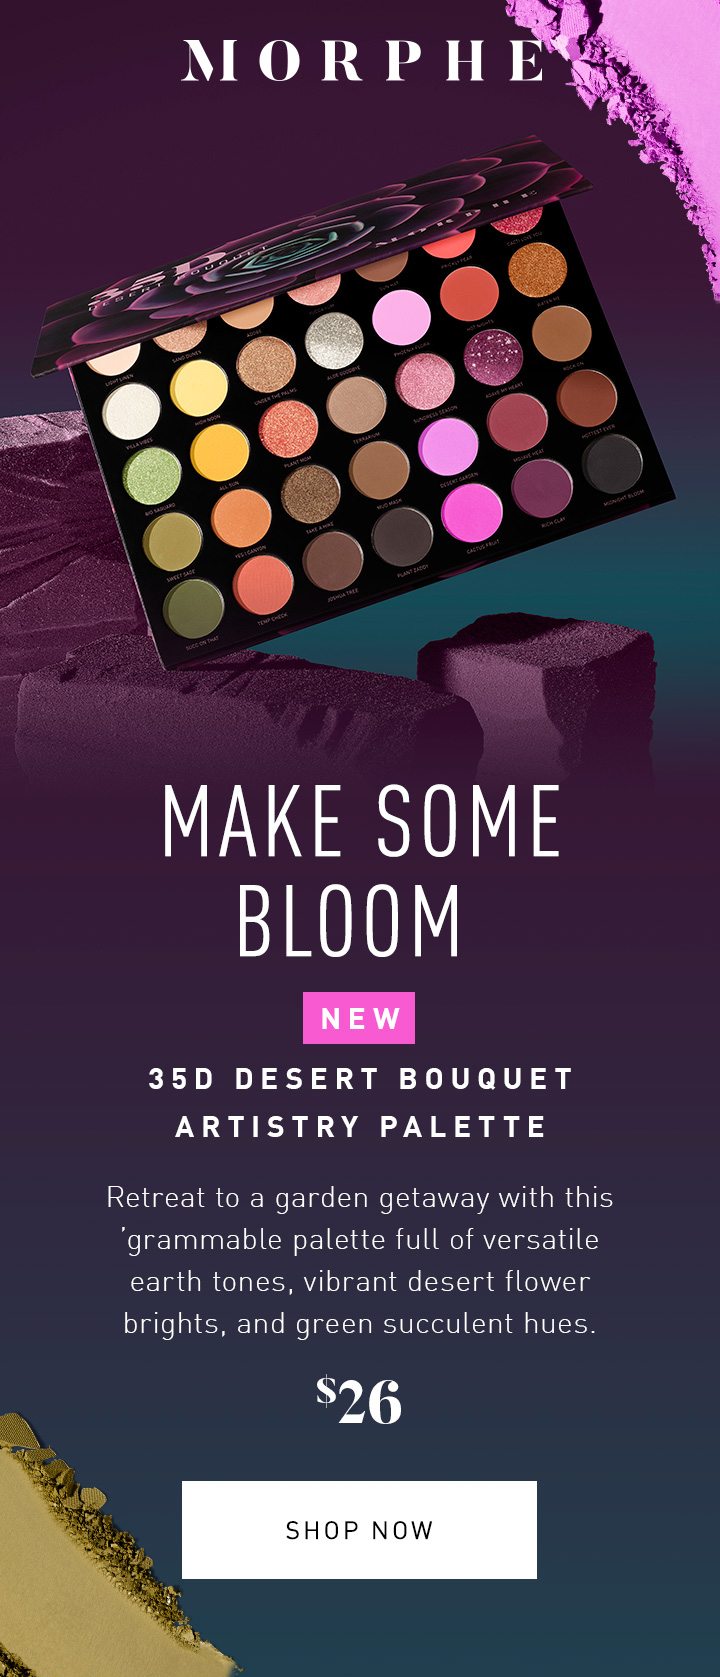 MORPHE MAKE SOME BLOOM NEW 35D DESERT BOUQUET ARTISTRY PALETTE Retreat to a garden getaway with this ’grammable palette full of versatile earth tones, vibrant desert flower brights, and green succulent hues. $26 SHOP NOW